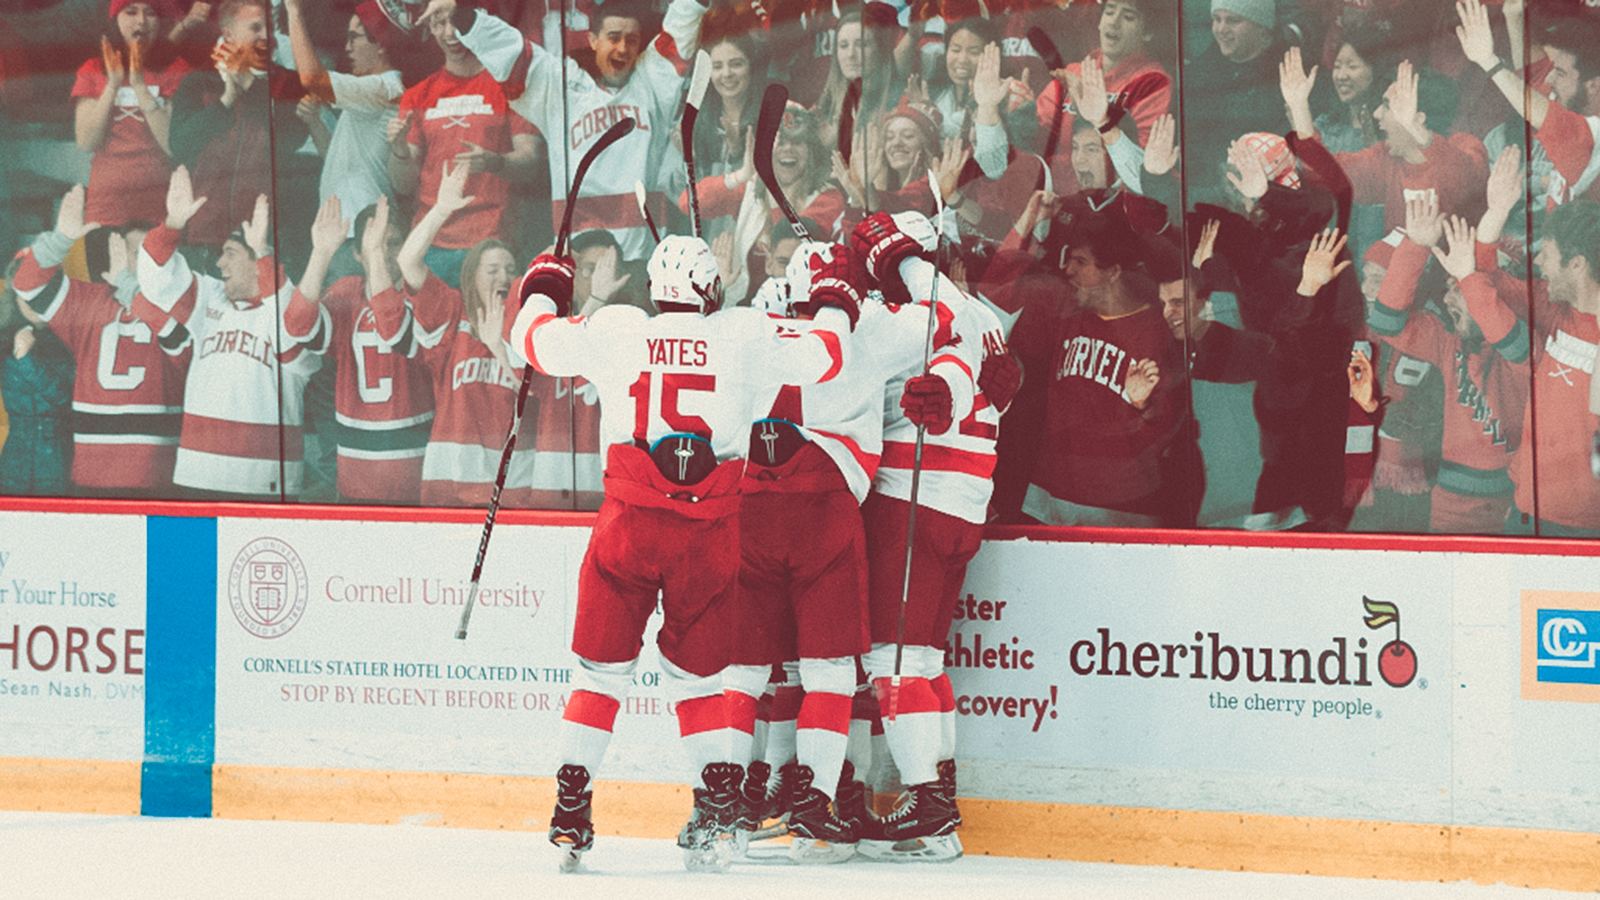 Cornell men's ice hockey players embrace each other at the end of a game as fans cheer on nearby.